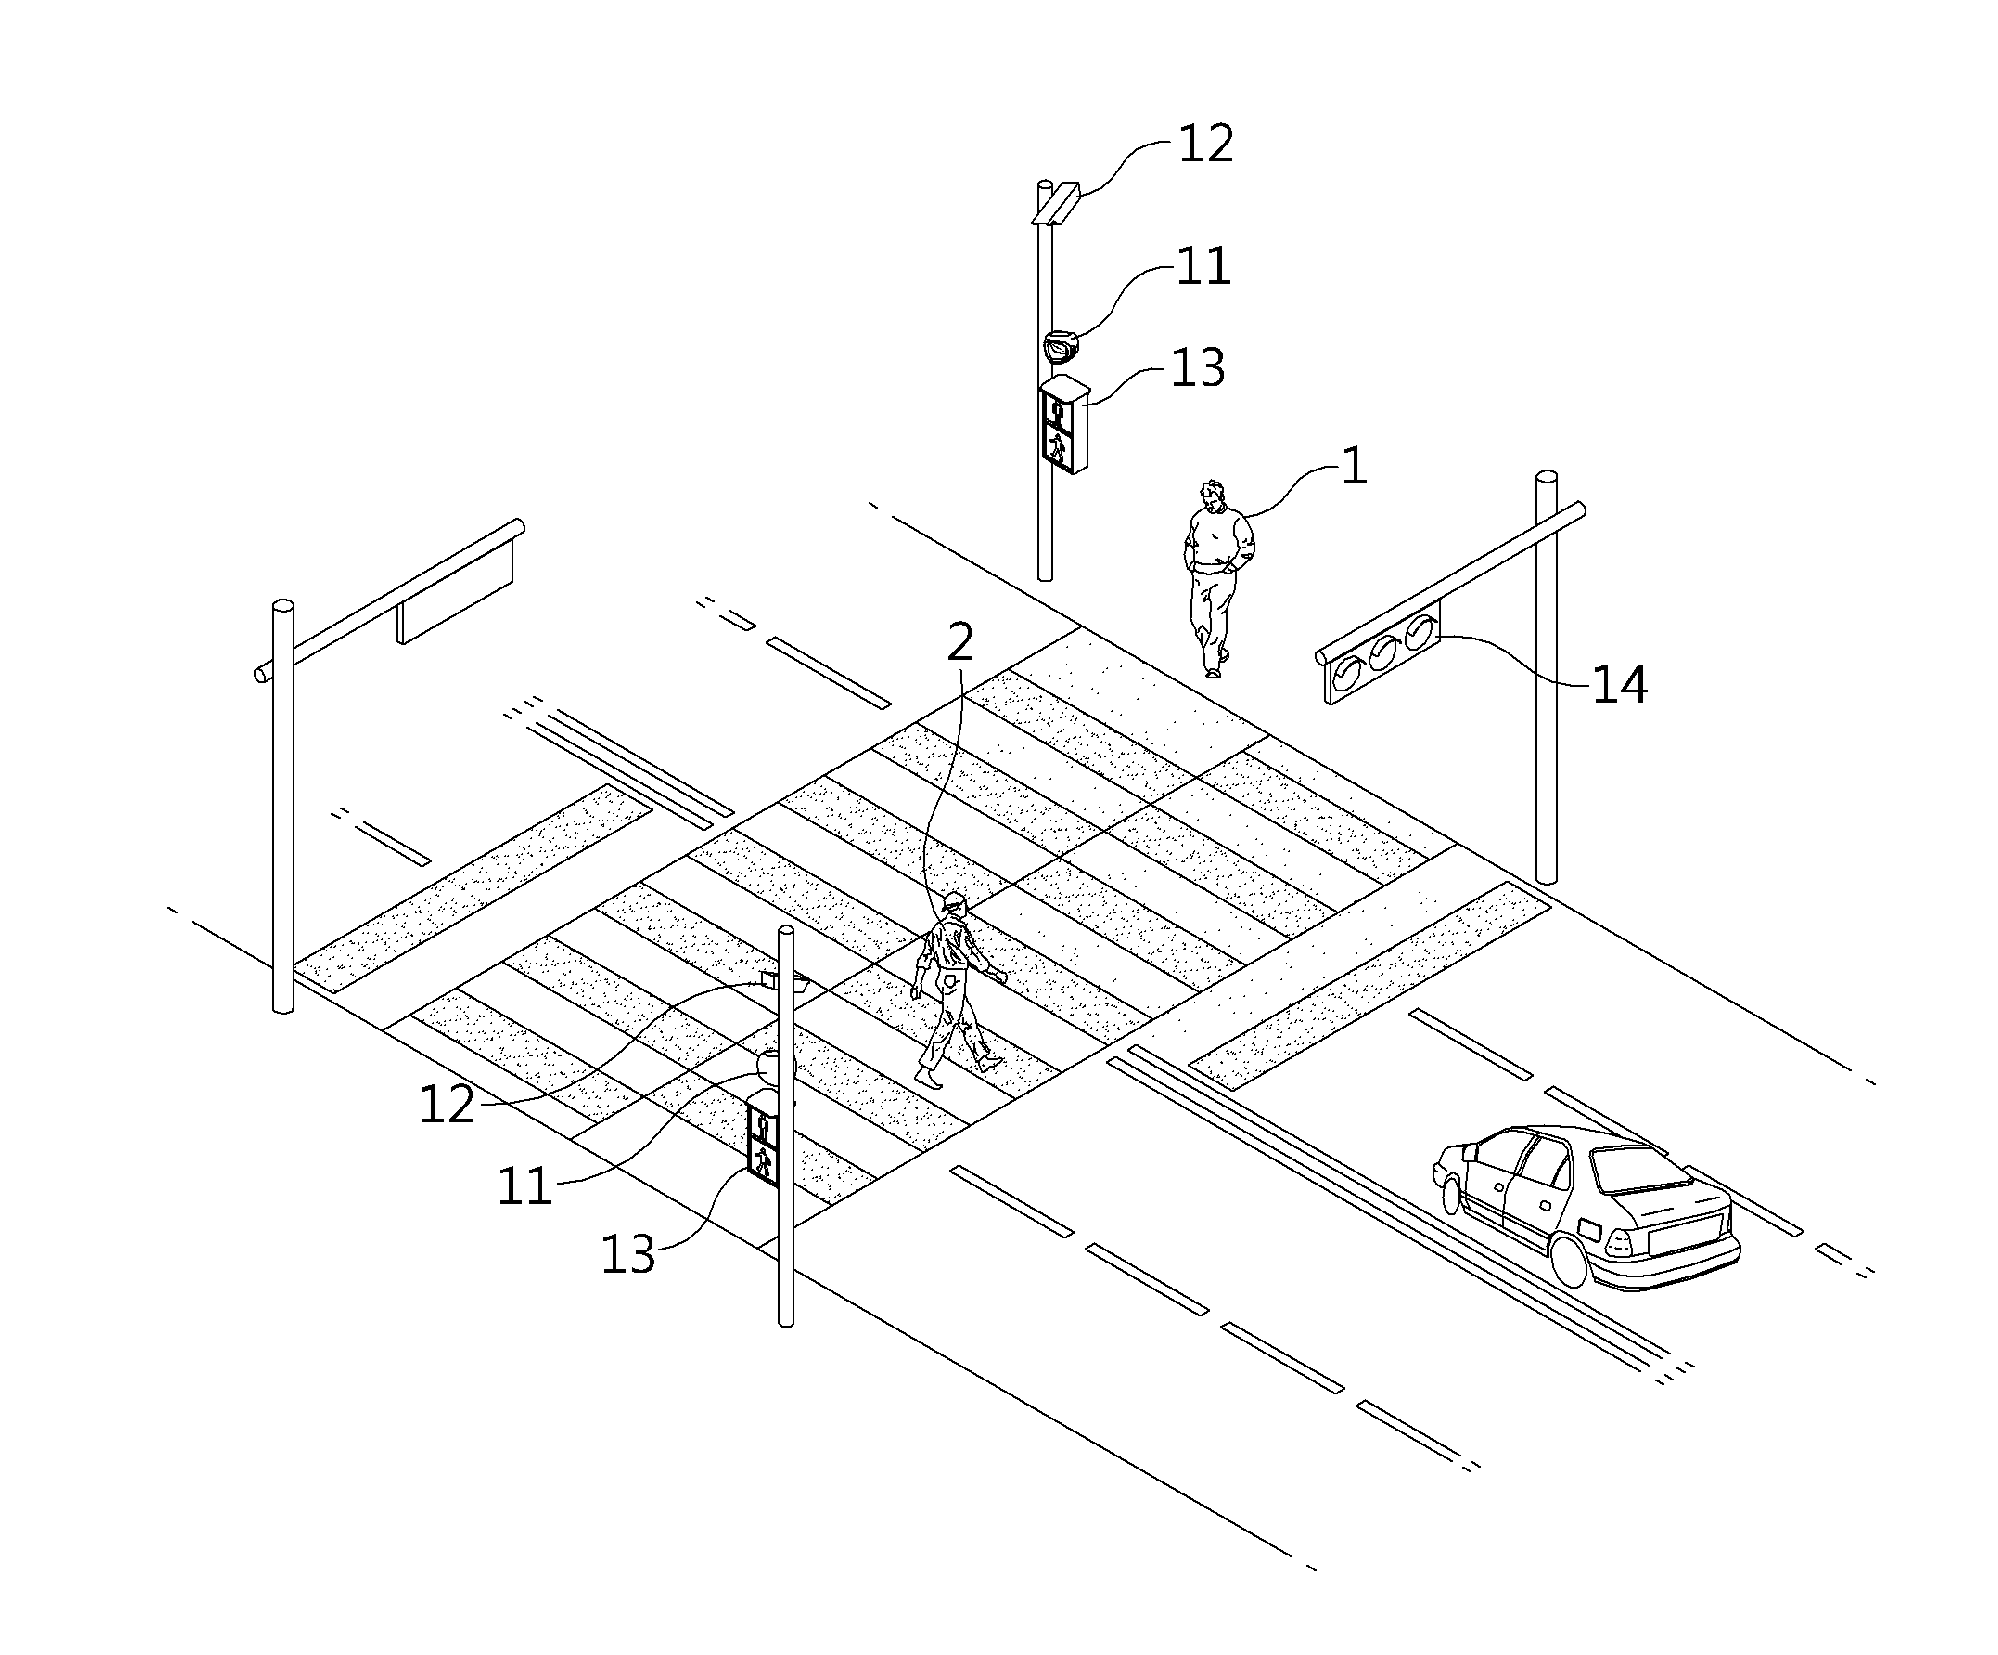 Apparatus and method for managing safety of pedestrian at crosswalk